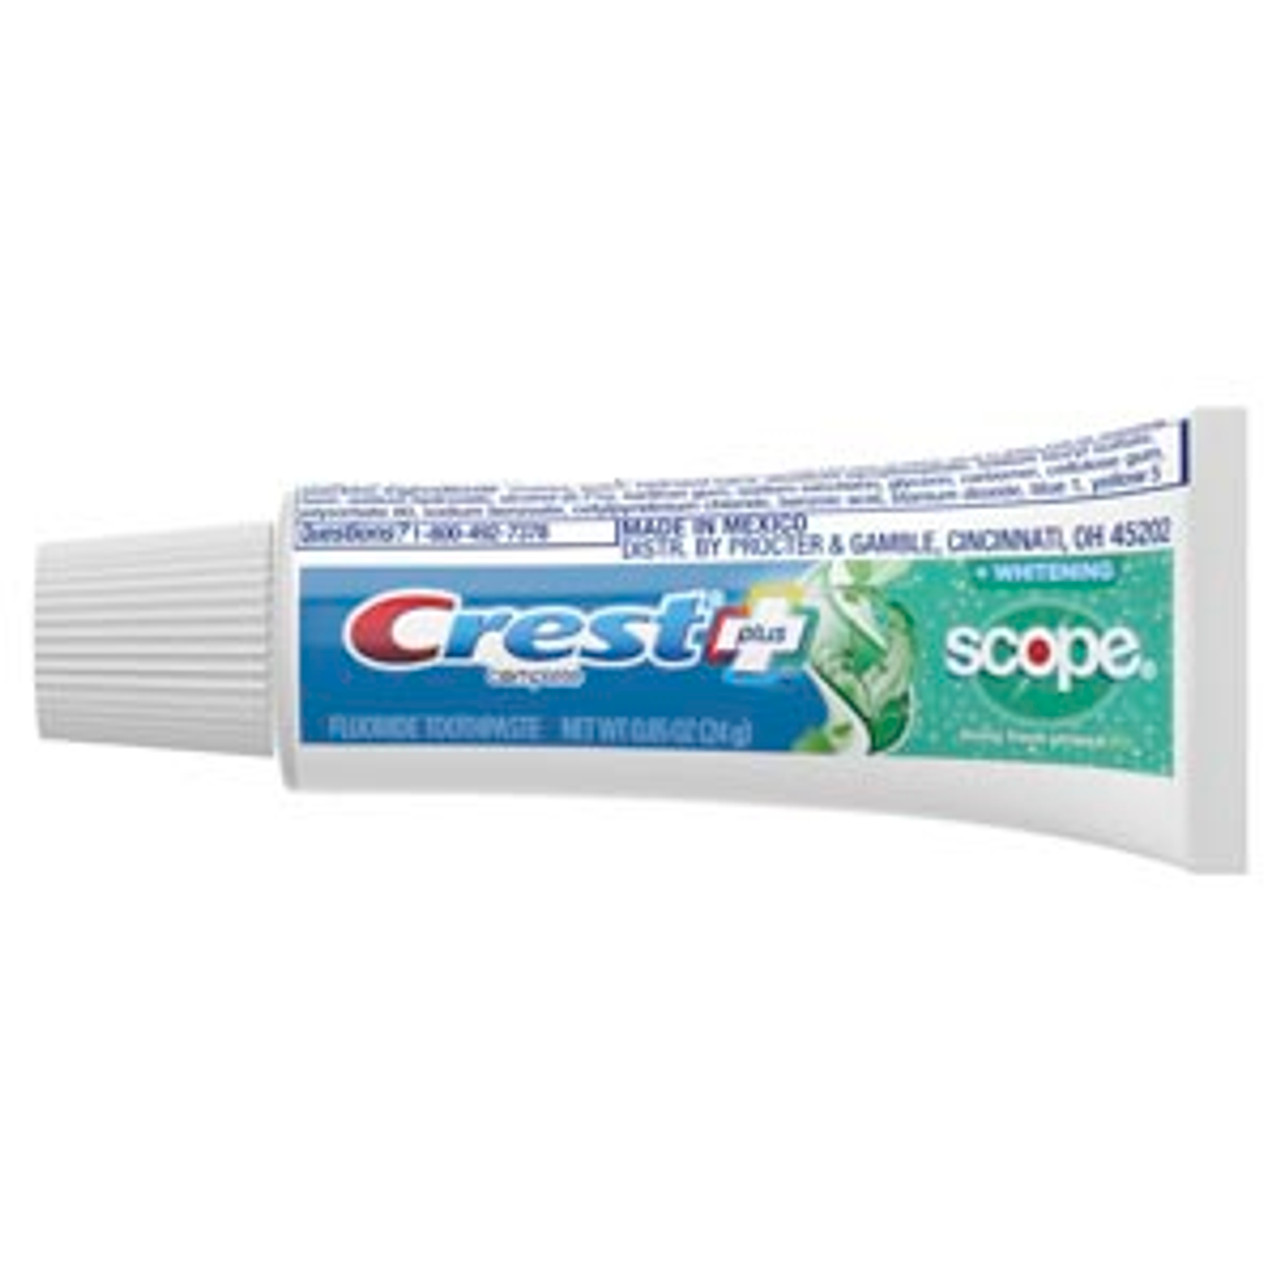 P&G CREST COMPLETE MULTI-BENEFIT WHITENING + SCOPE TOOTHPASTE, 80691656